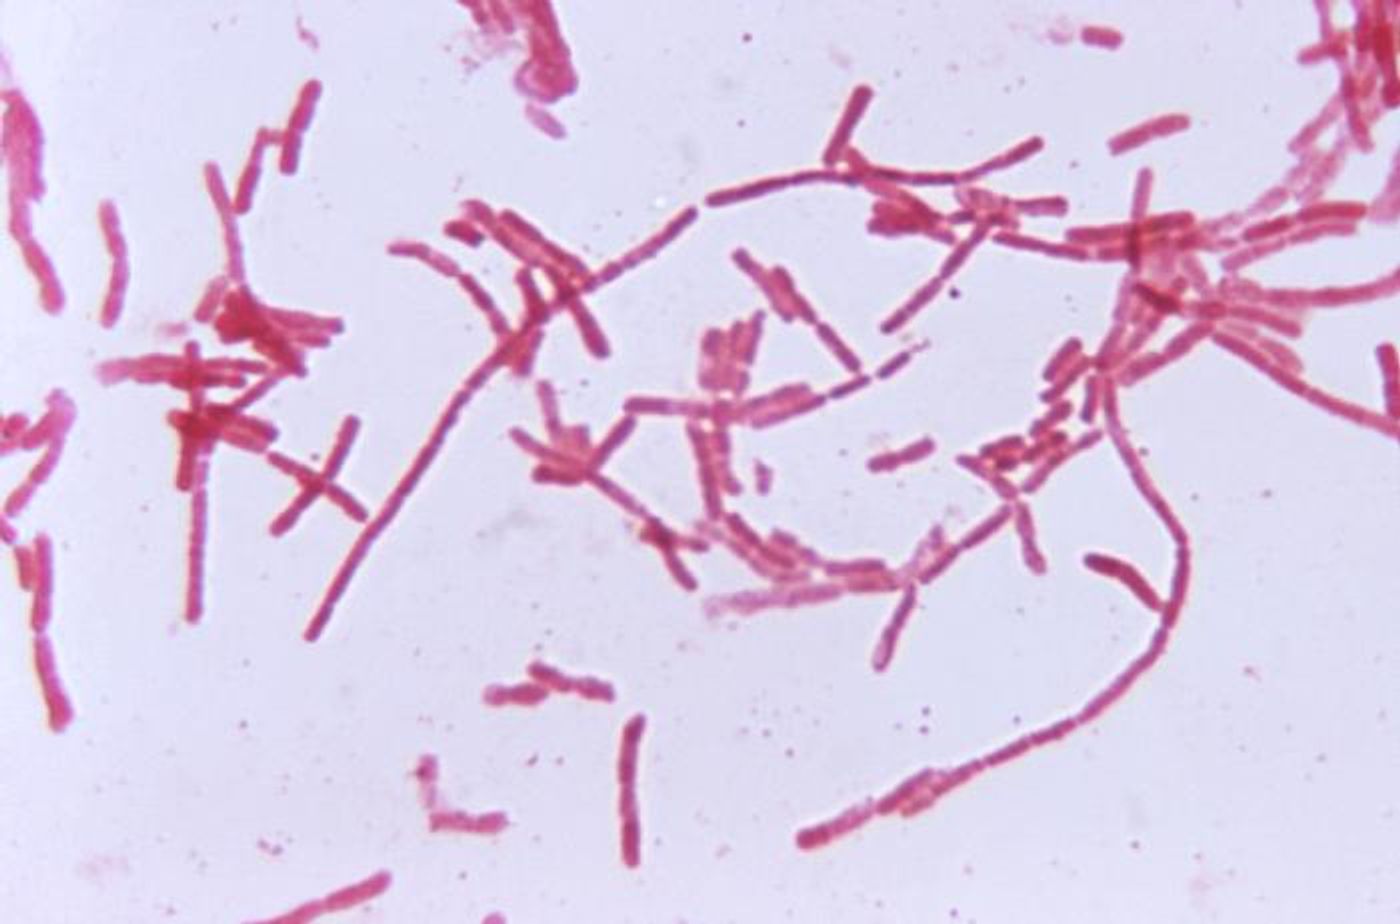 Bacteroides bacteria, which are mainly found in the intestine as normal flora. / Credit: CDC / Dr. V. R. Dowell, Jr.